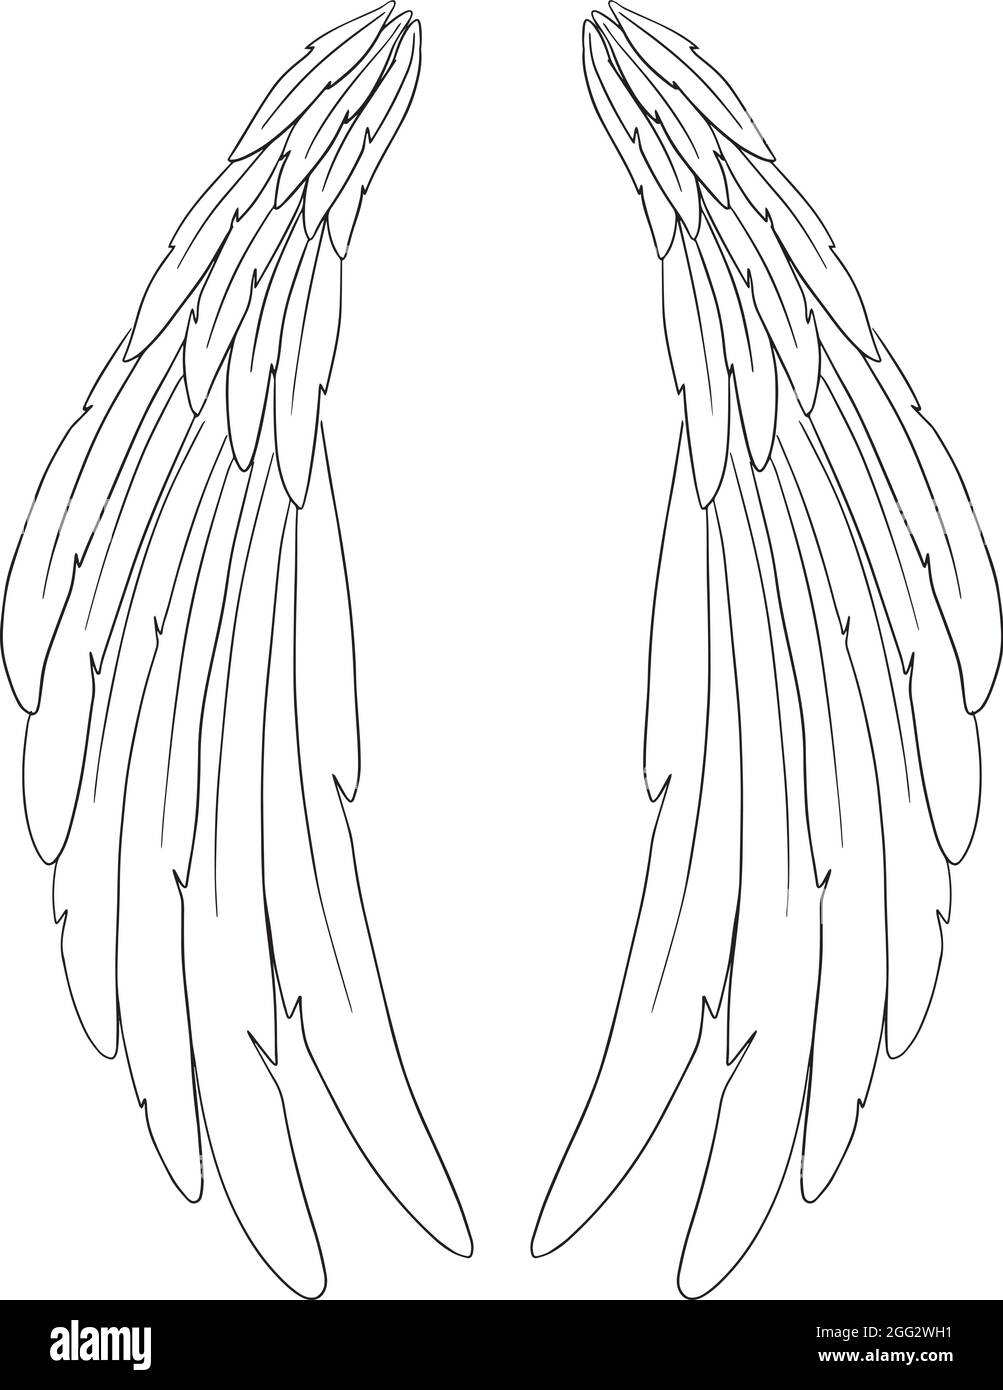 Angel Feather Wings Vector Illustration Stock Vector Image & Art - Alamy